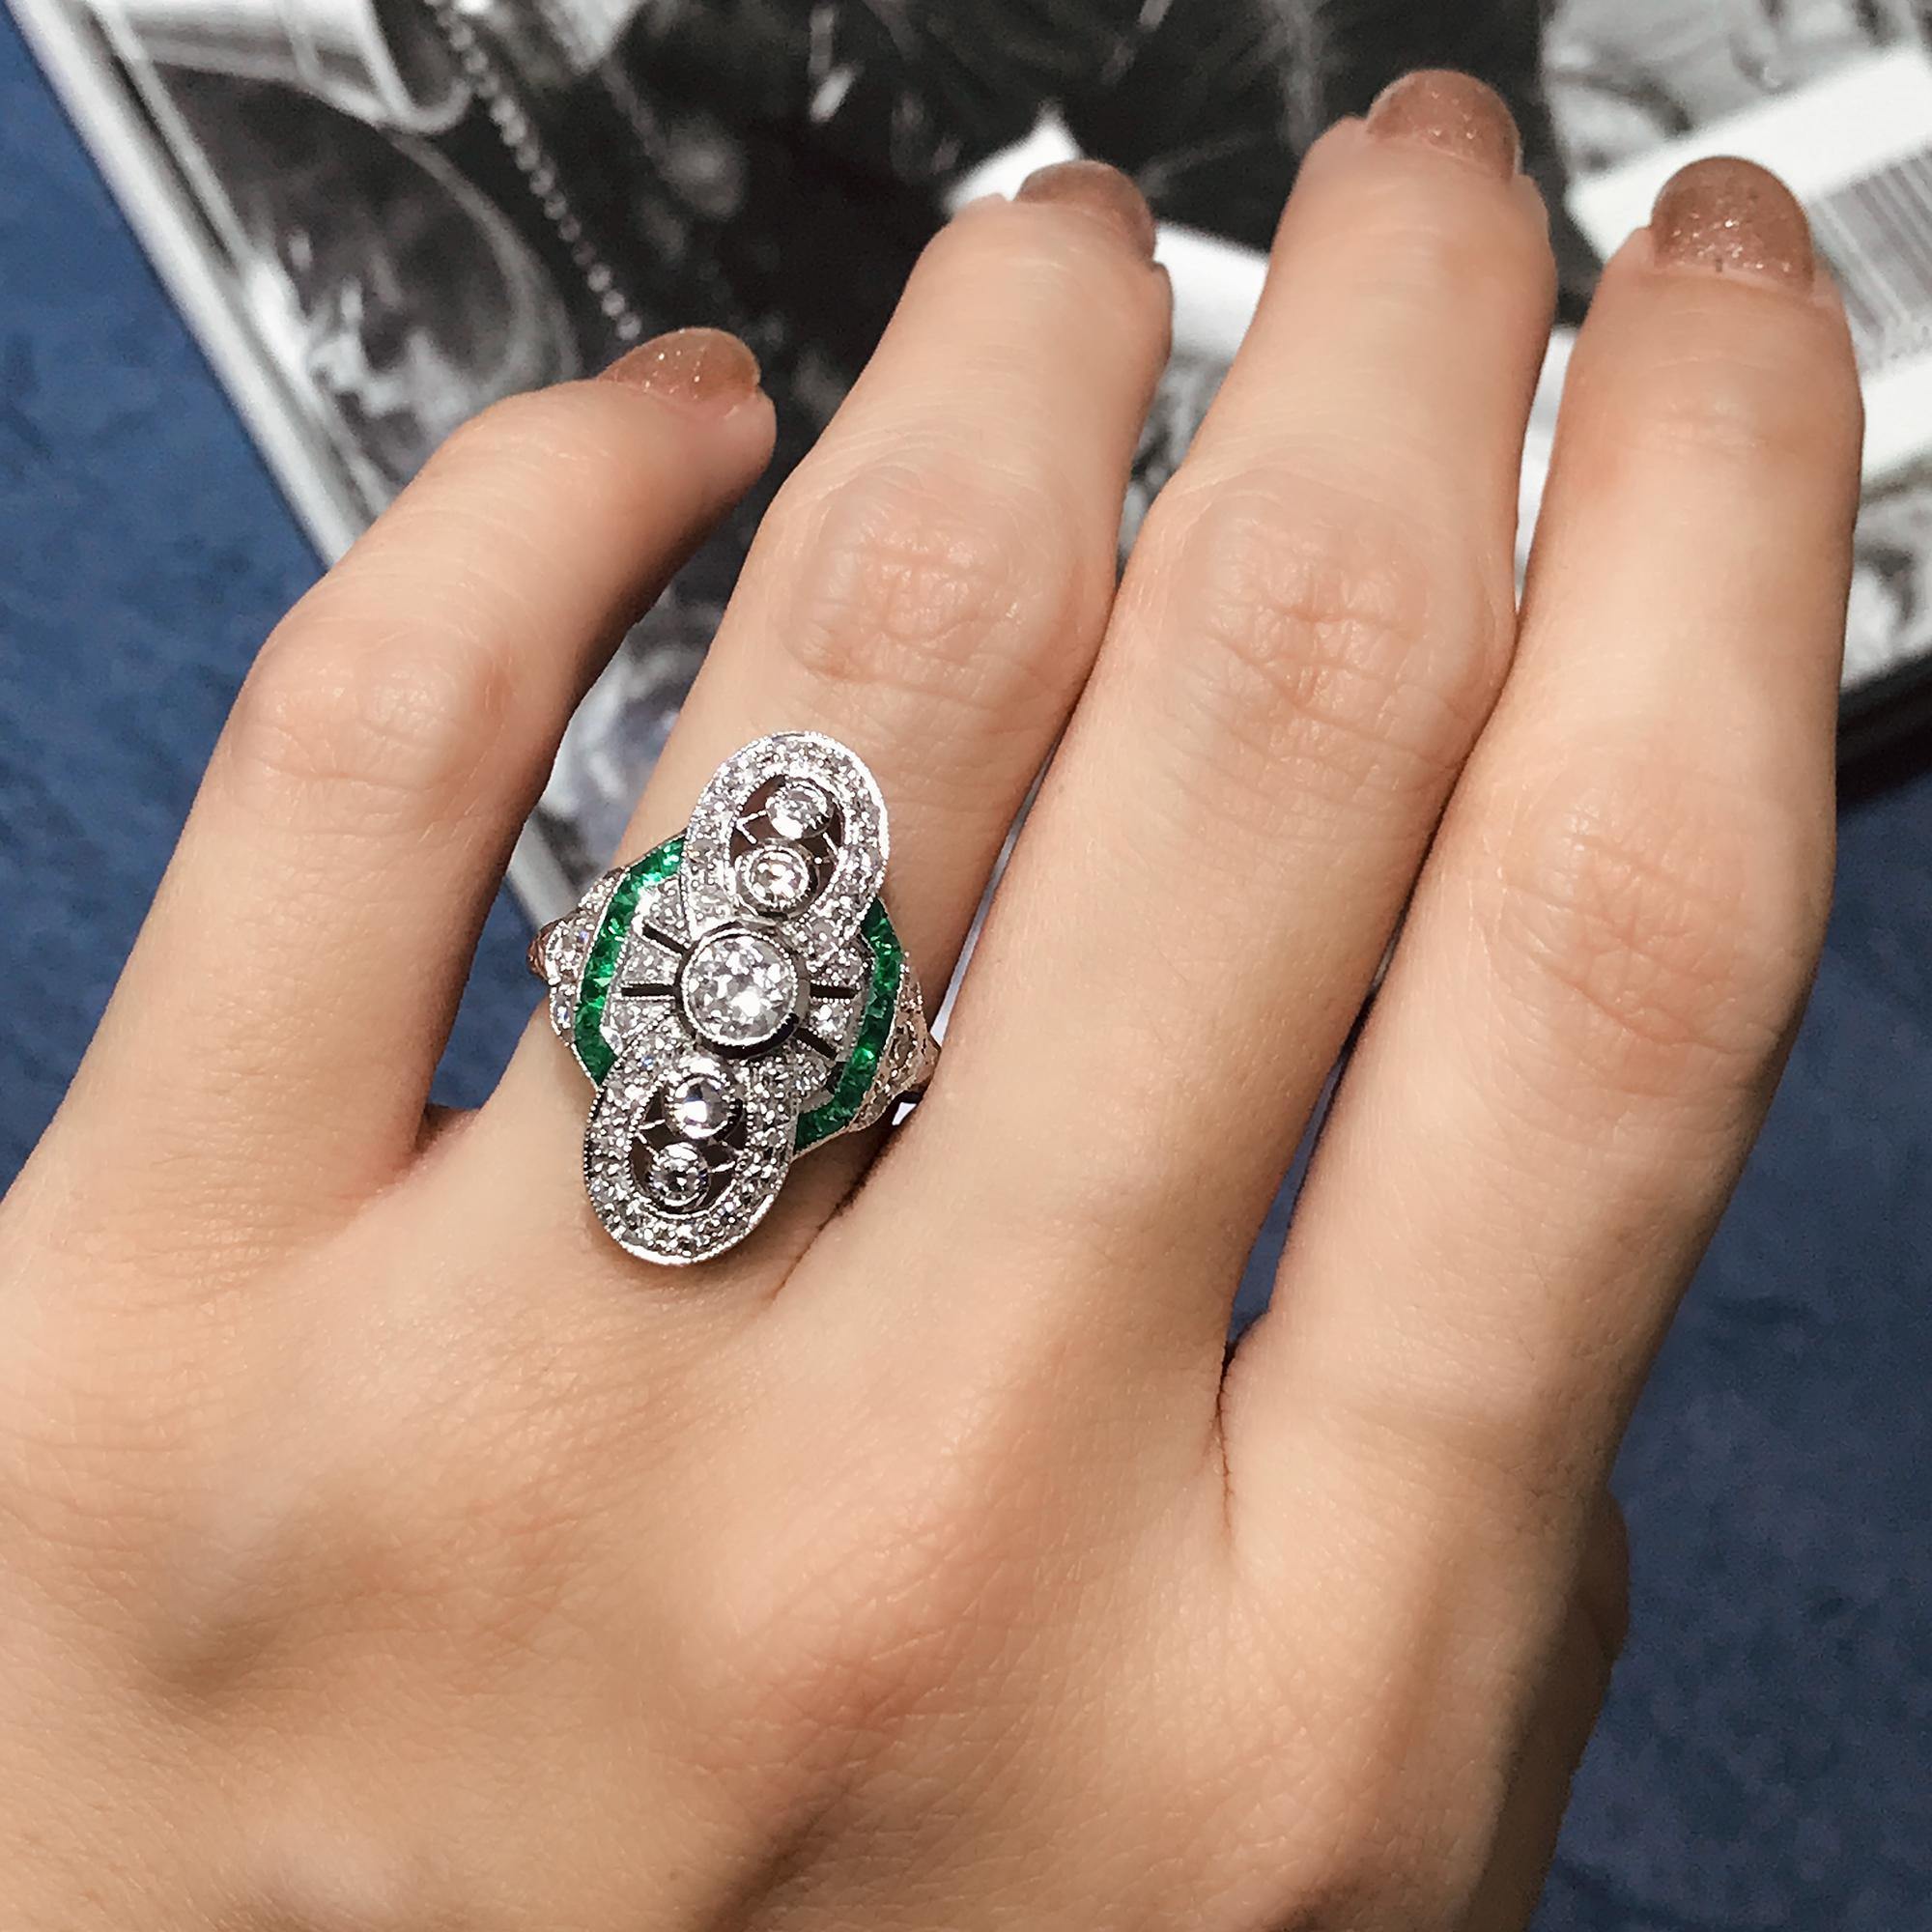 This Art Deco style ring sits low and hugs the finger nicely. It features round old cut diamonds in the center with French cut emerald on its west and east. Then multiple round cut diamond surround it. The milgrain adds to the vintage style.  

Ring